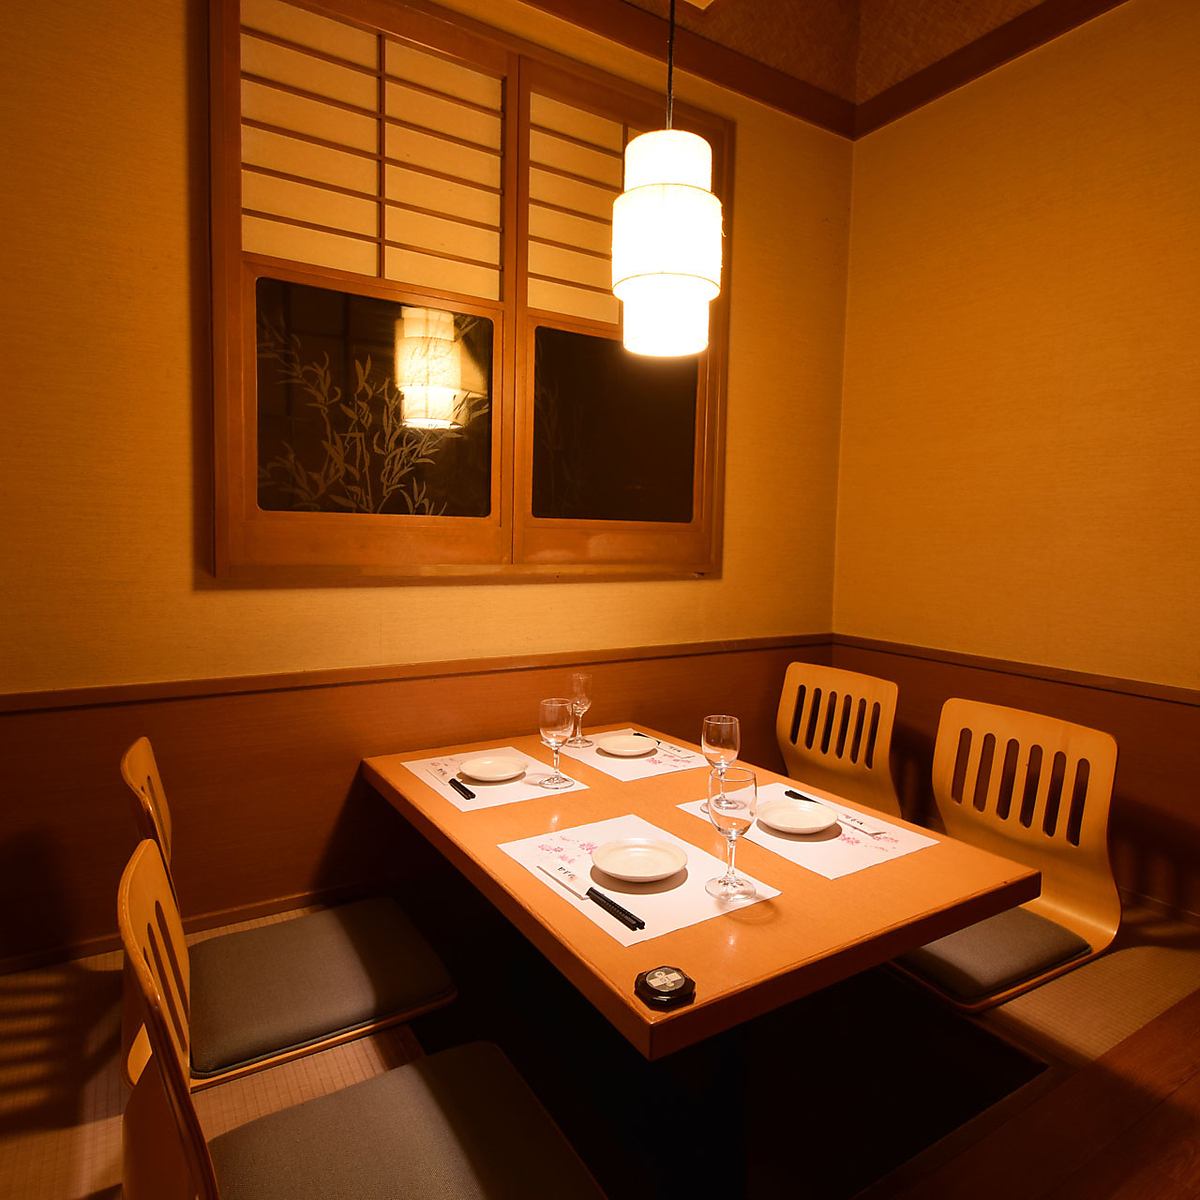 From 3,000 yen, you can enjoy a leisurely banquet in a private room with a sunken kotatsu table.